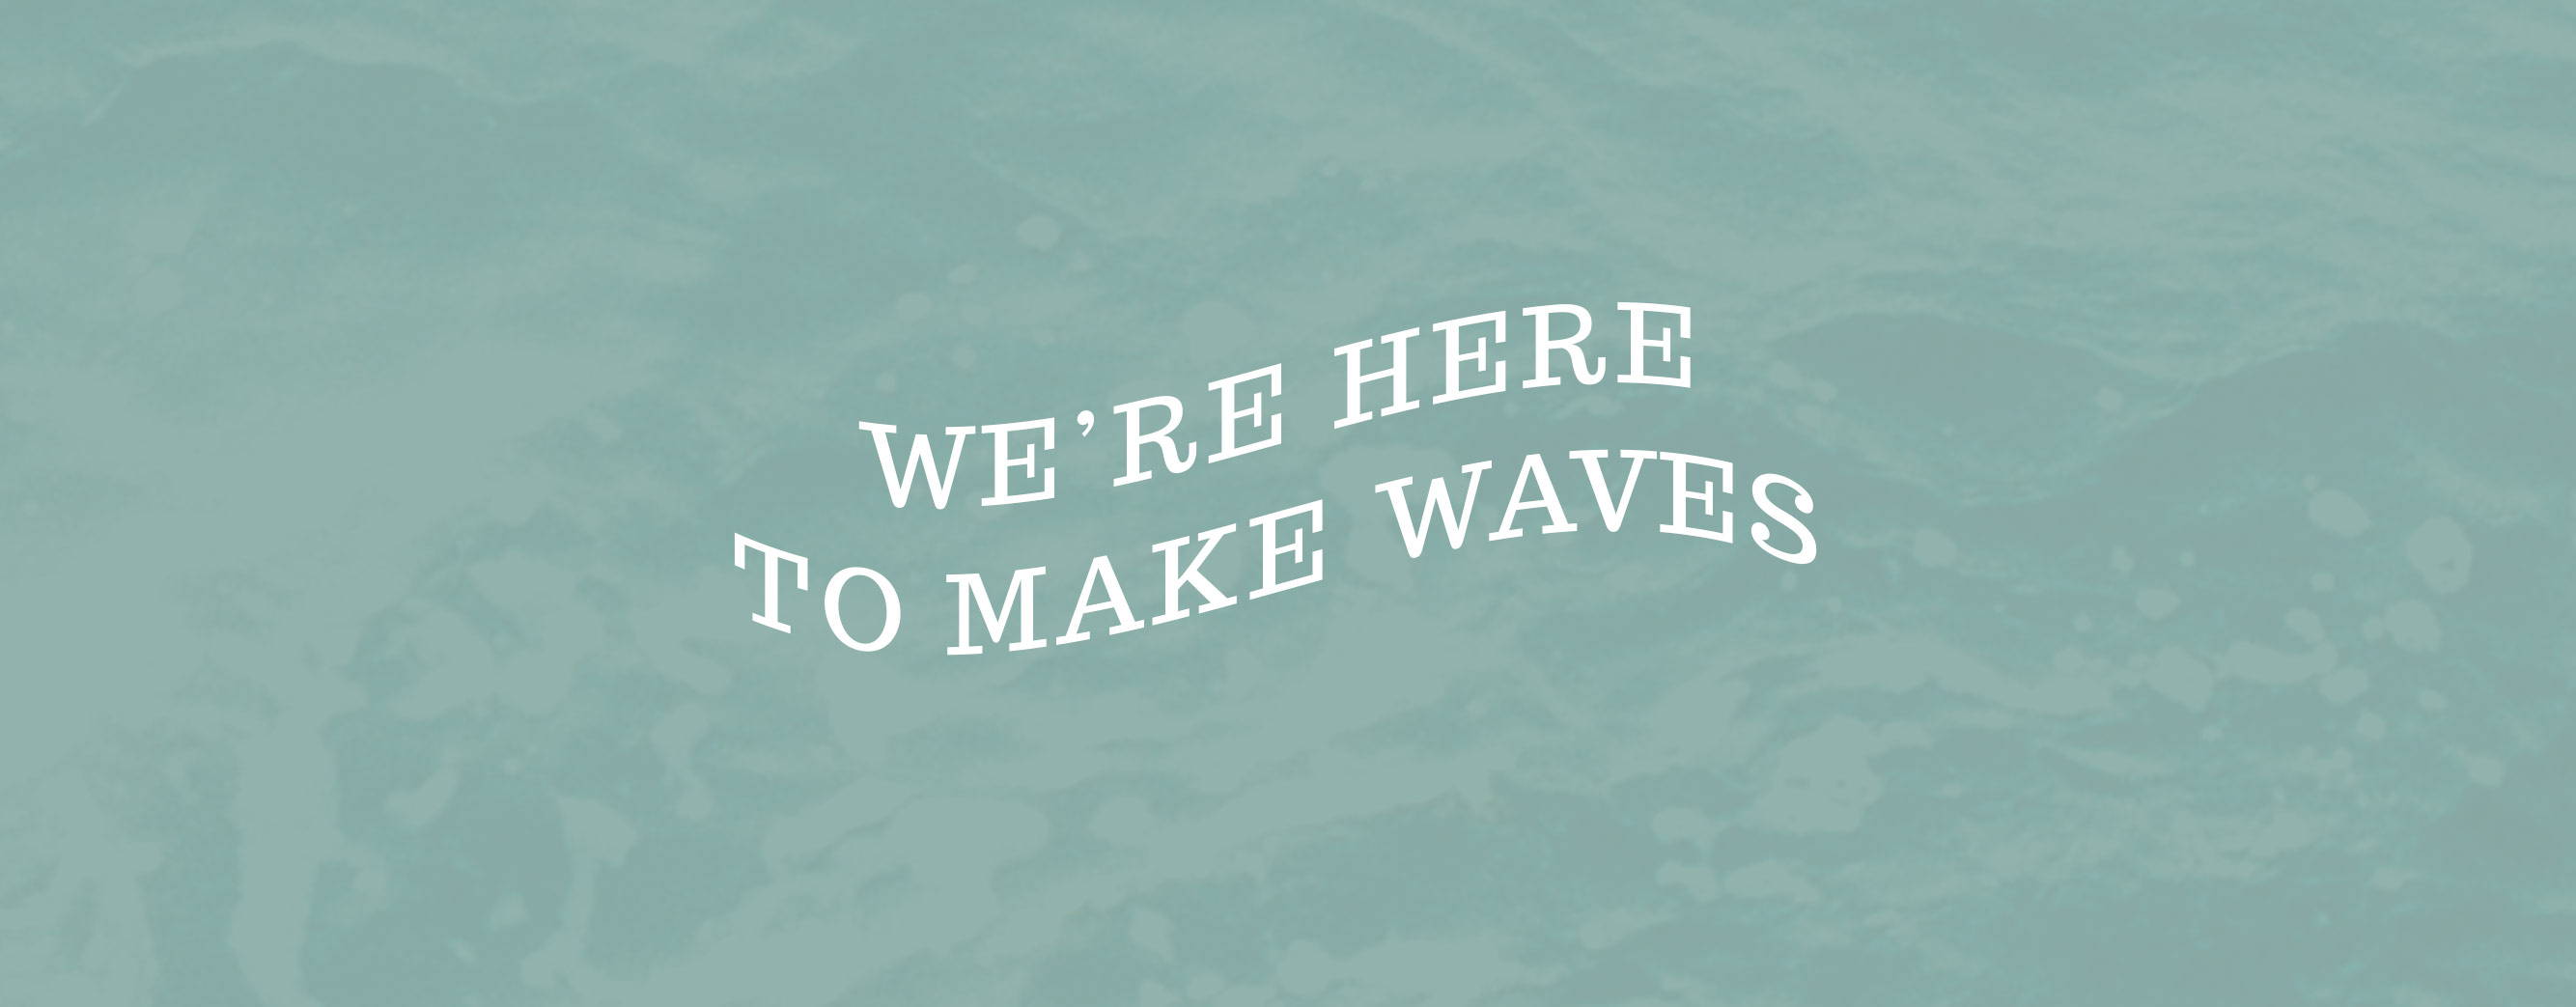 We're here to make waves